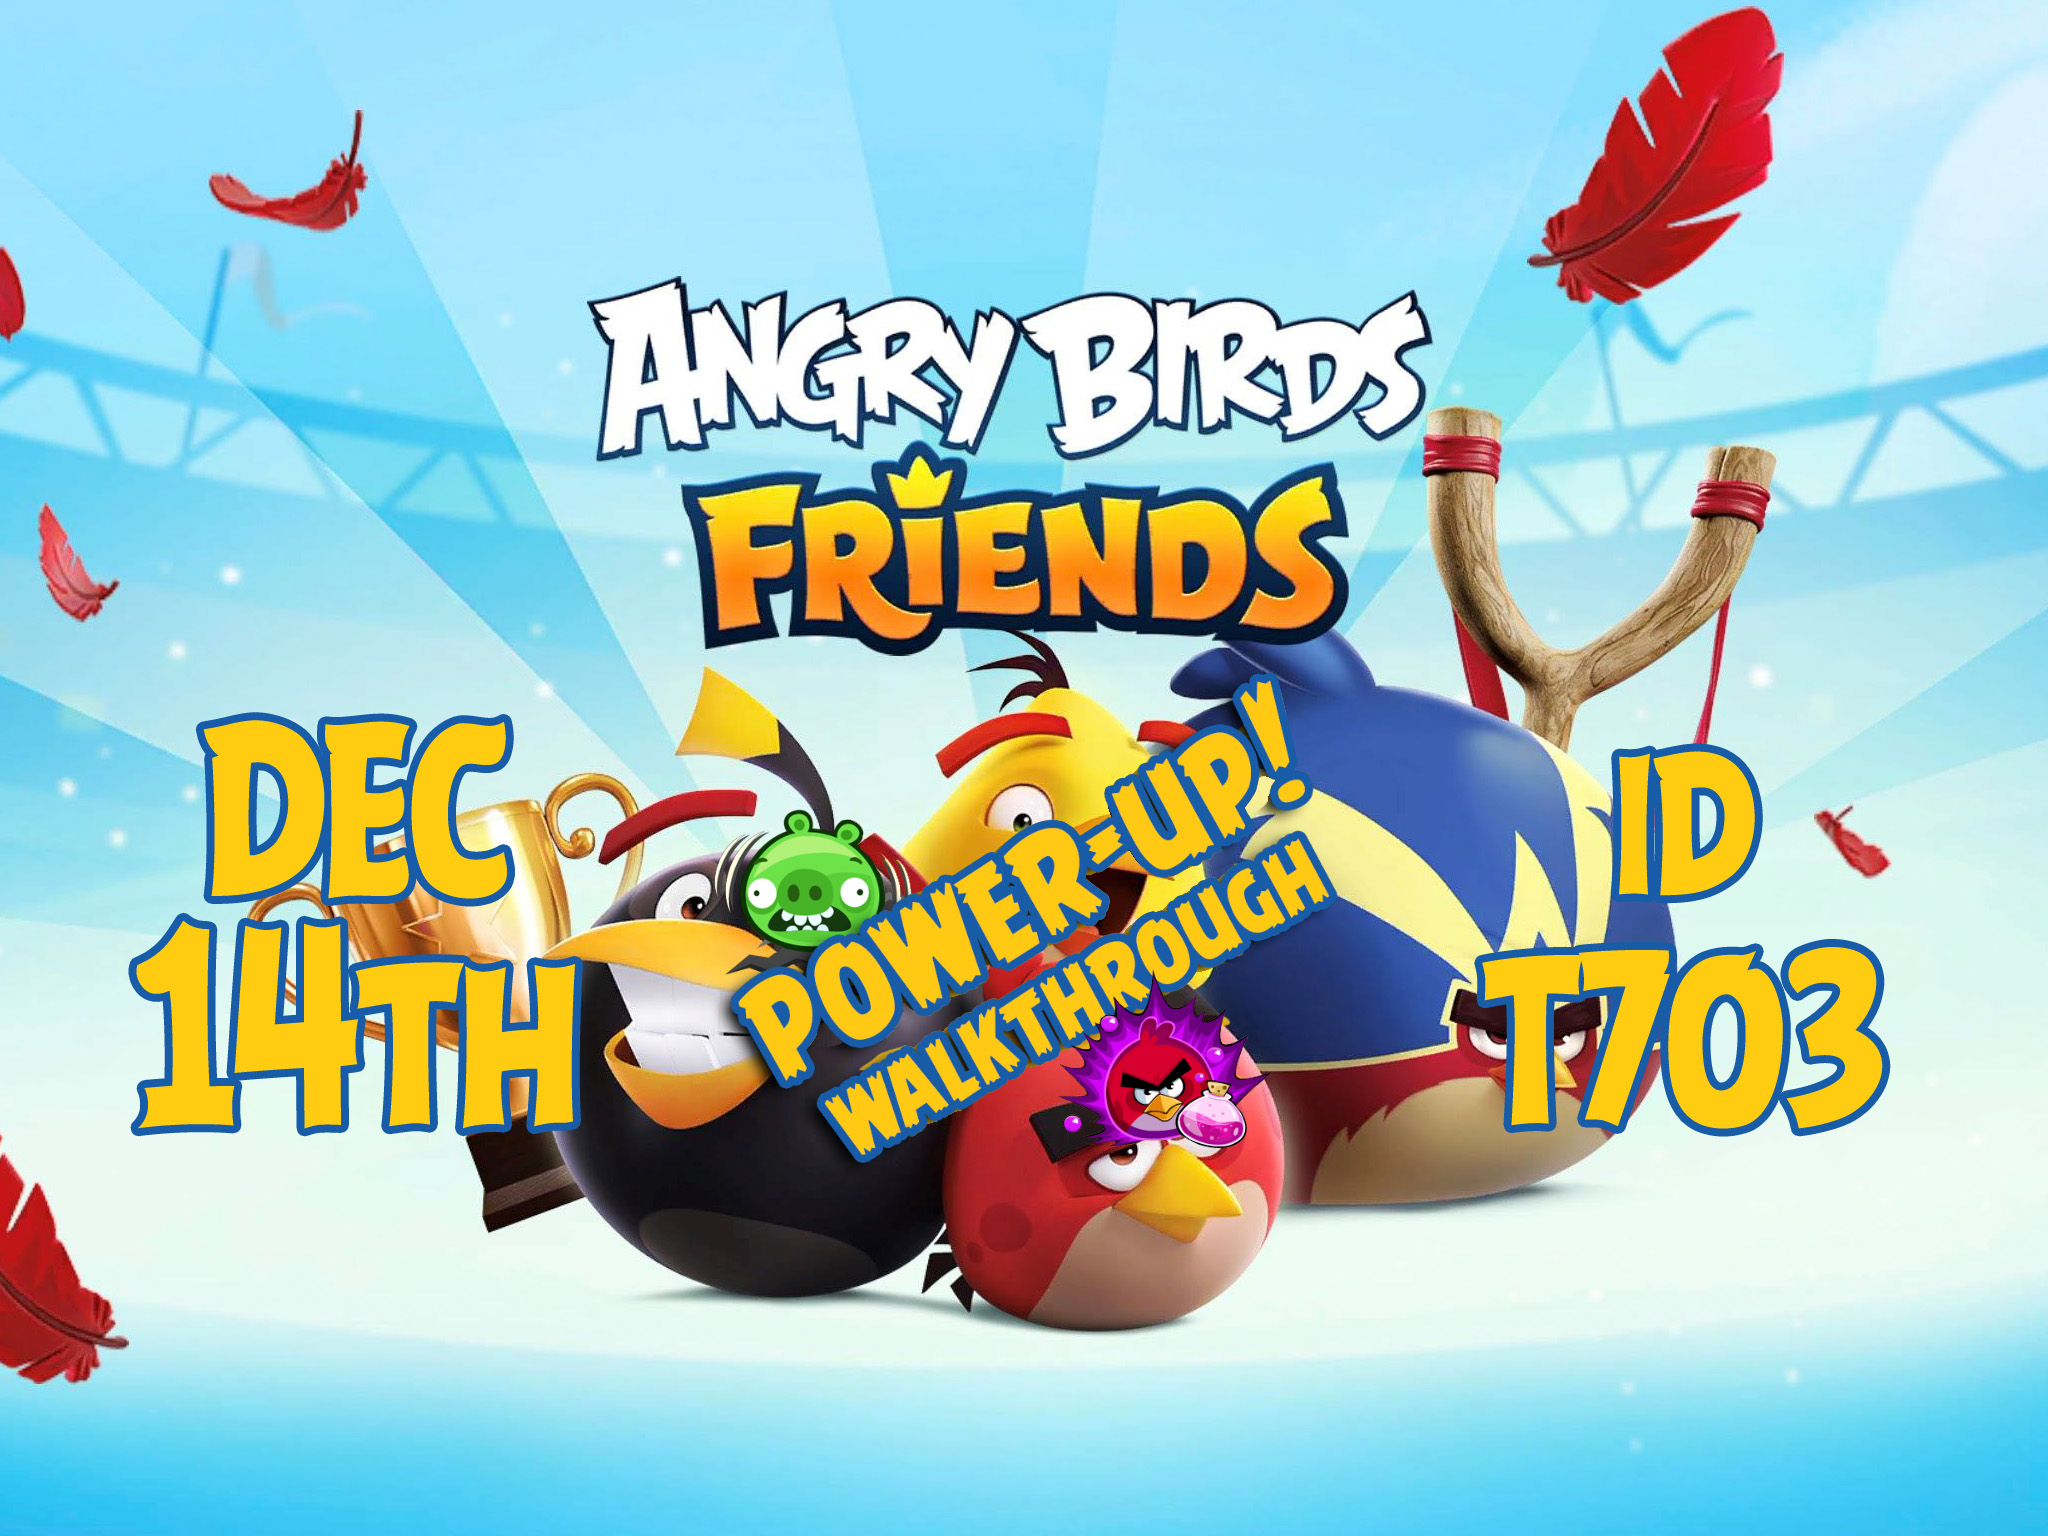 Angry-Birds-Friends-Tournament-T703-Feature-Image-PU